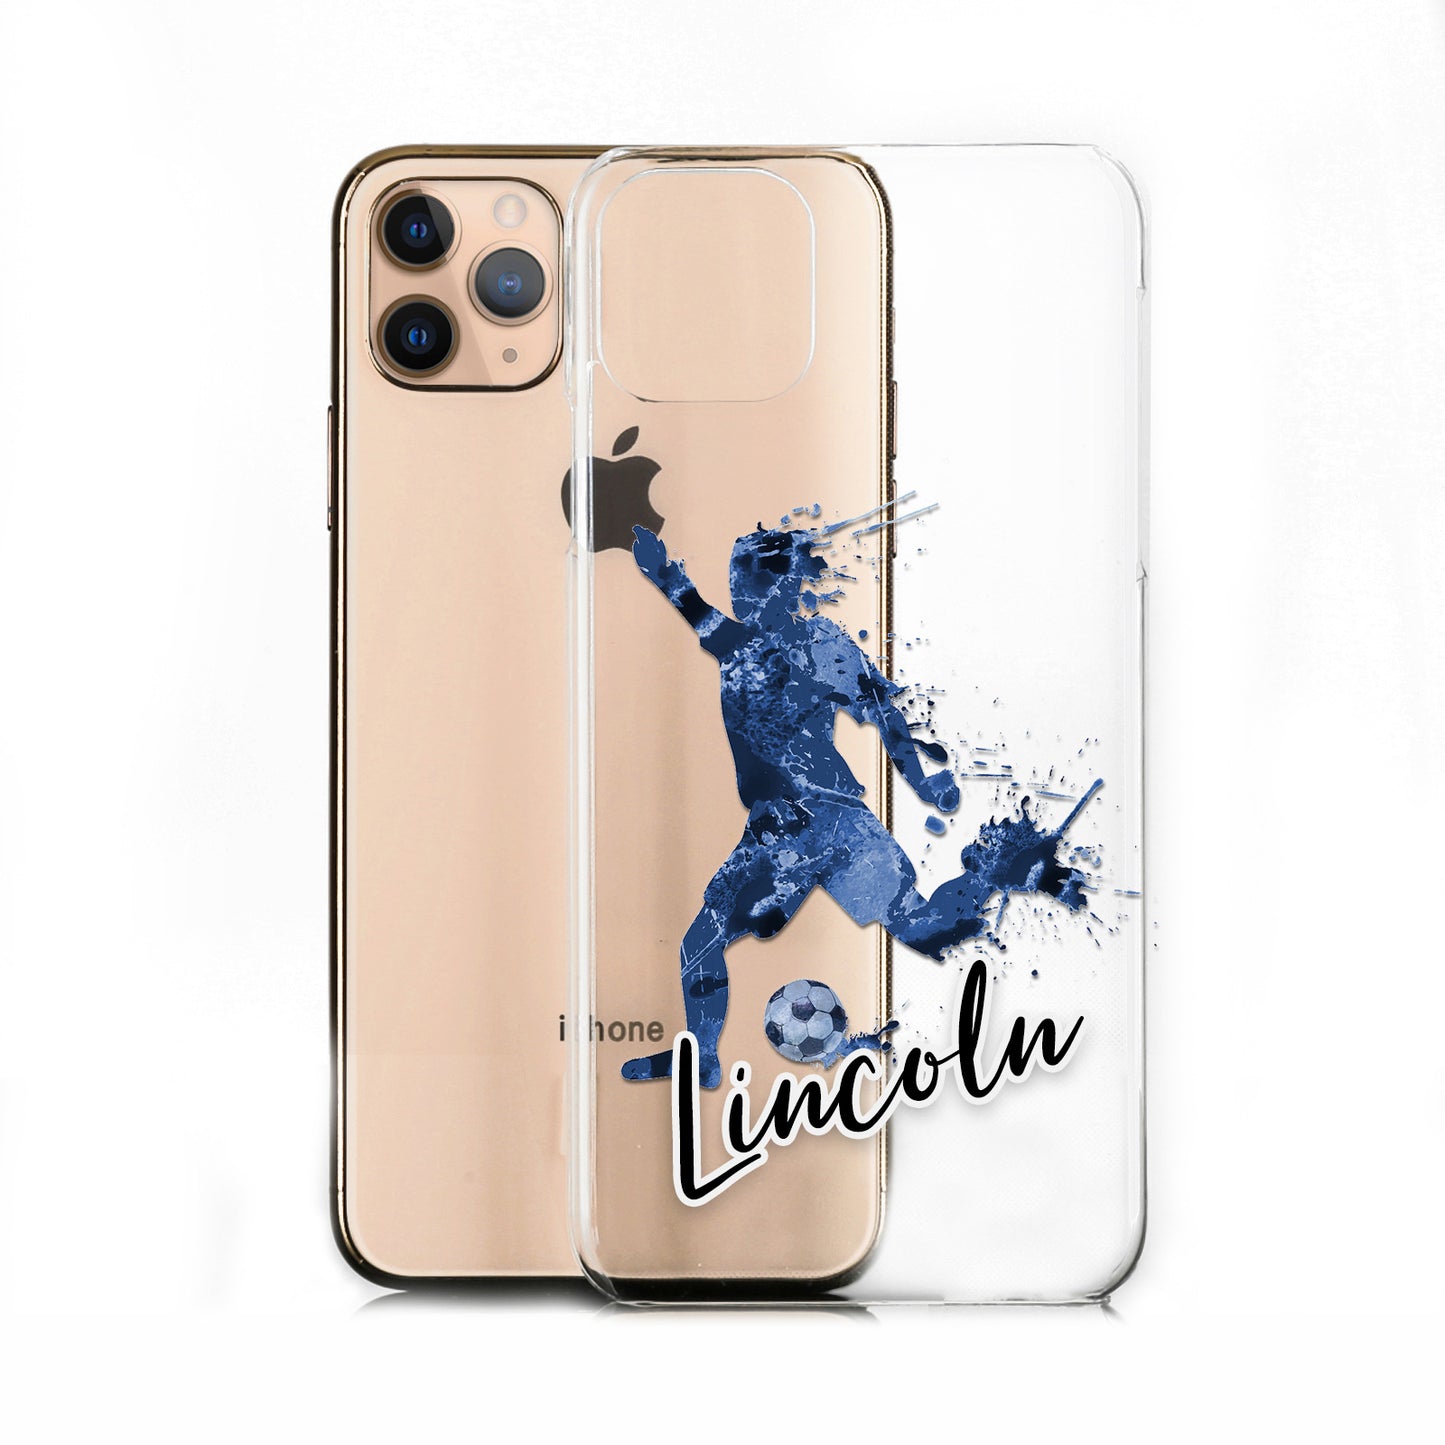 Personalised Nokia Phone Hard Case - Vivid Blue Football Star with White Outlined Text